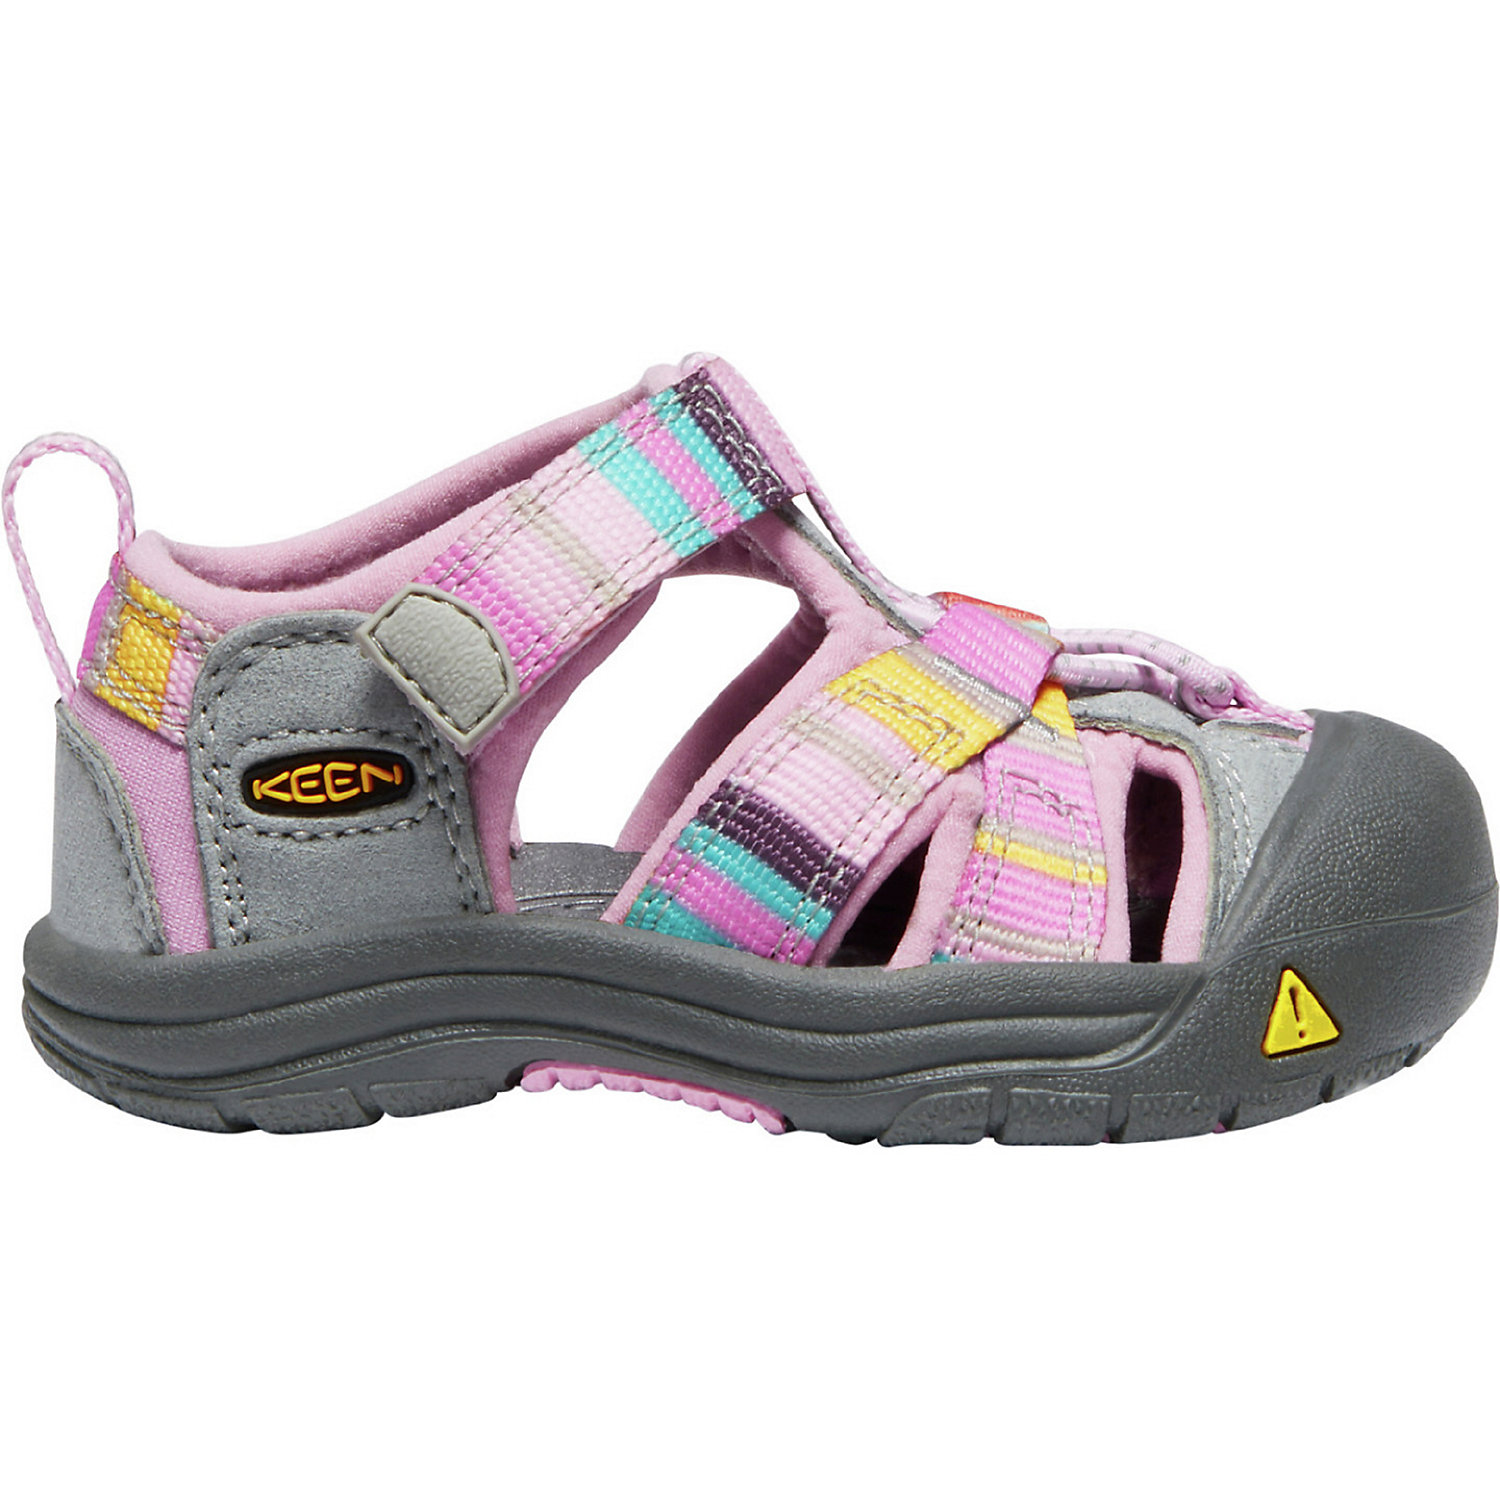 KEEN Toddlers Venice H2 Sandal